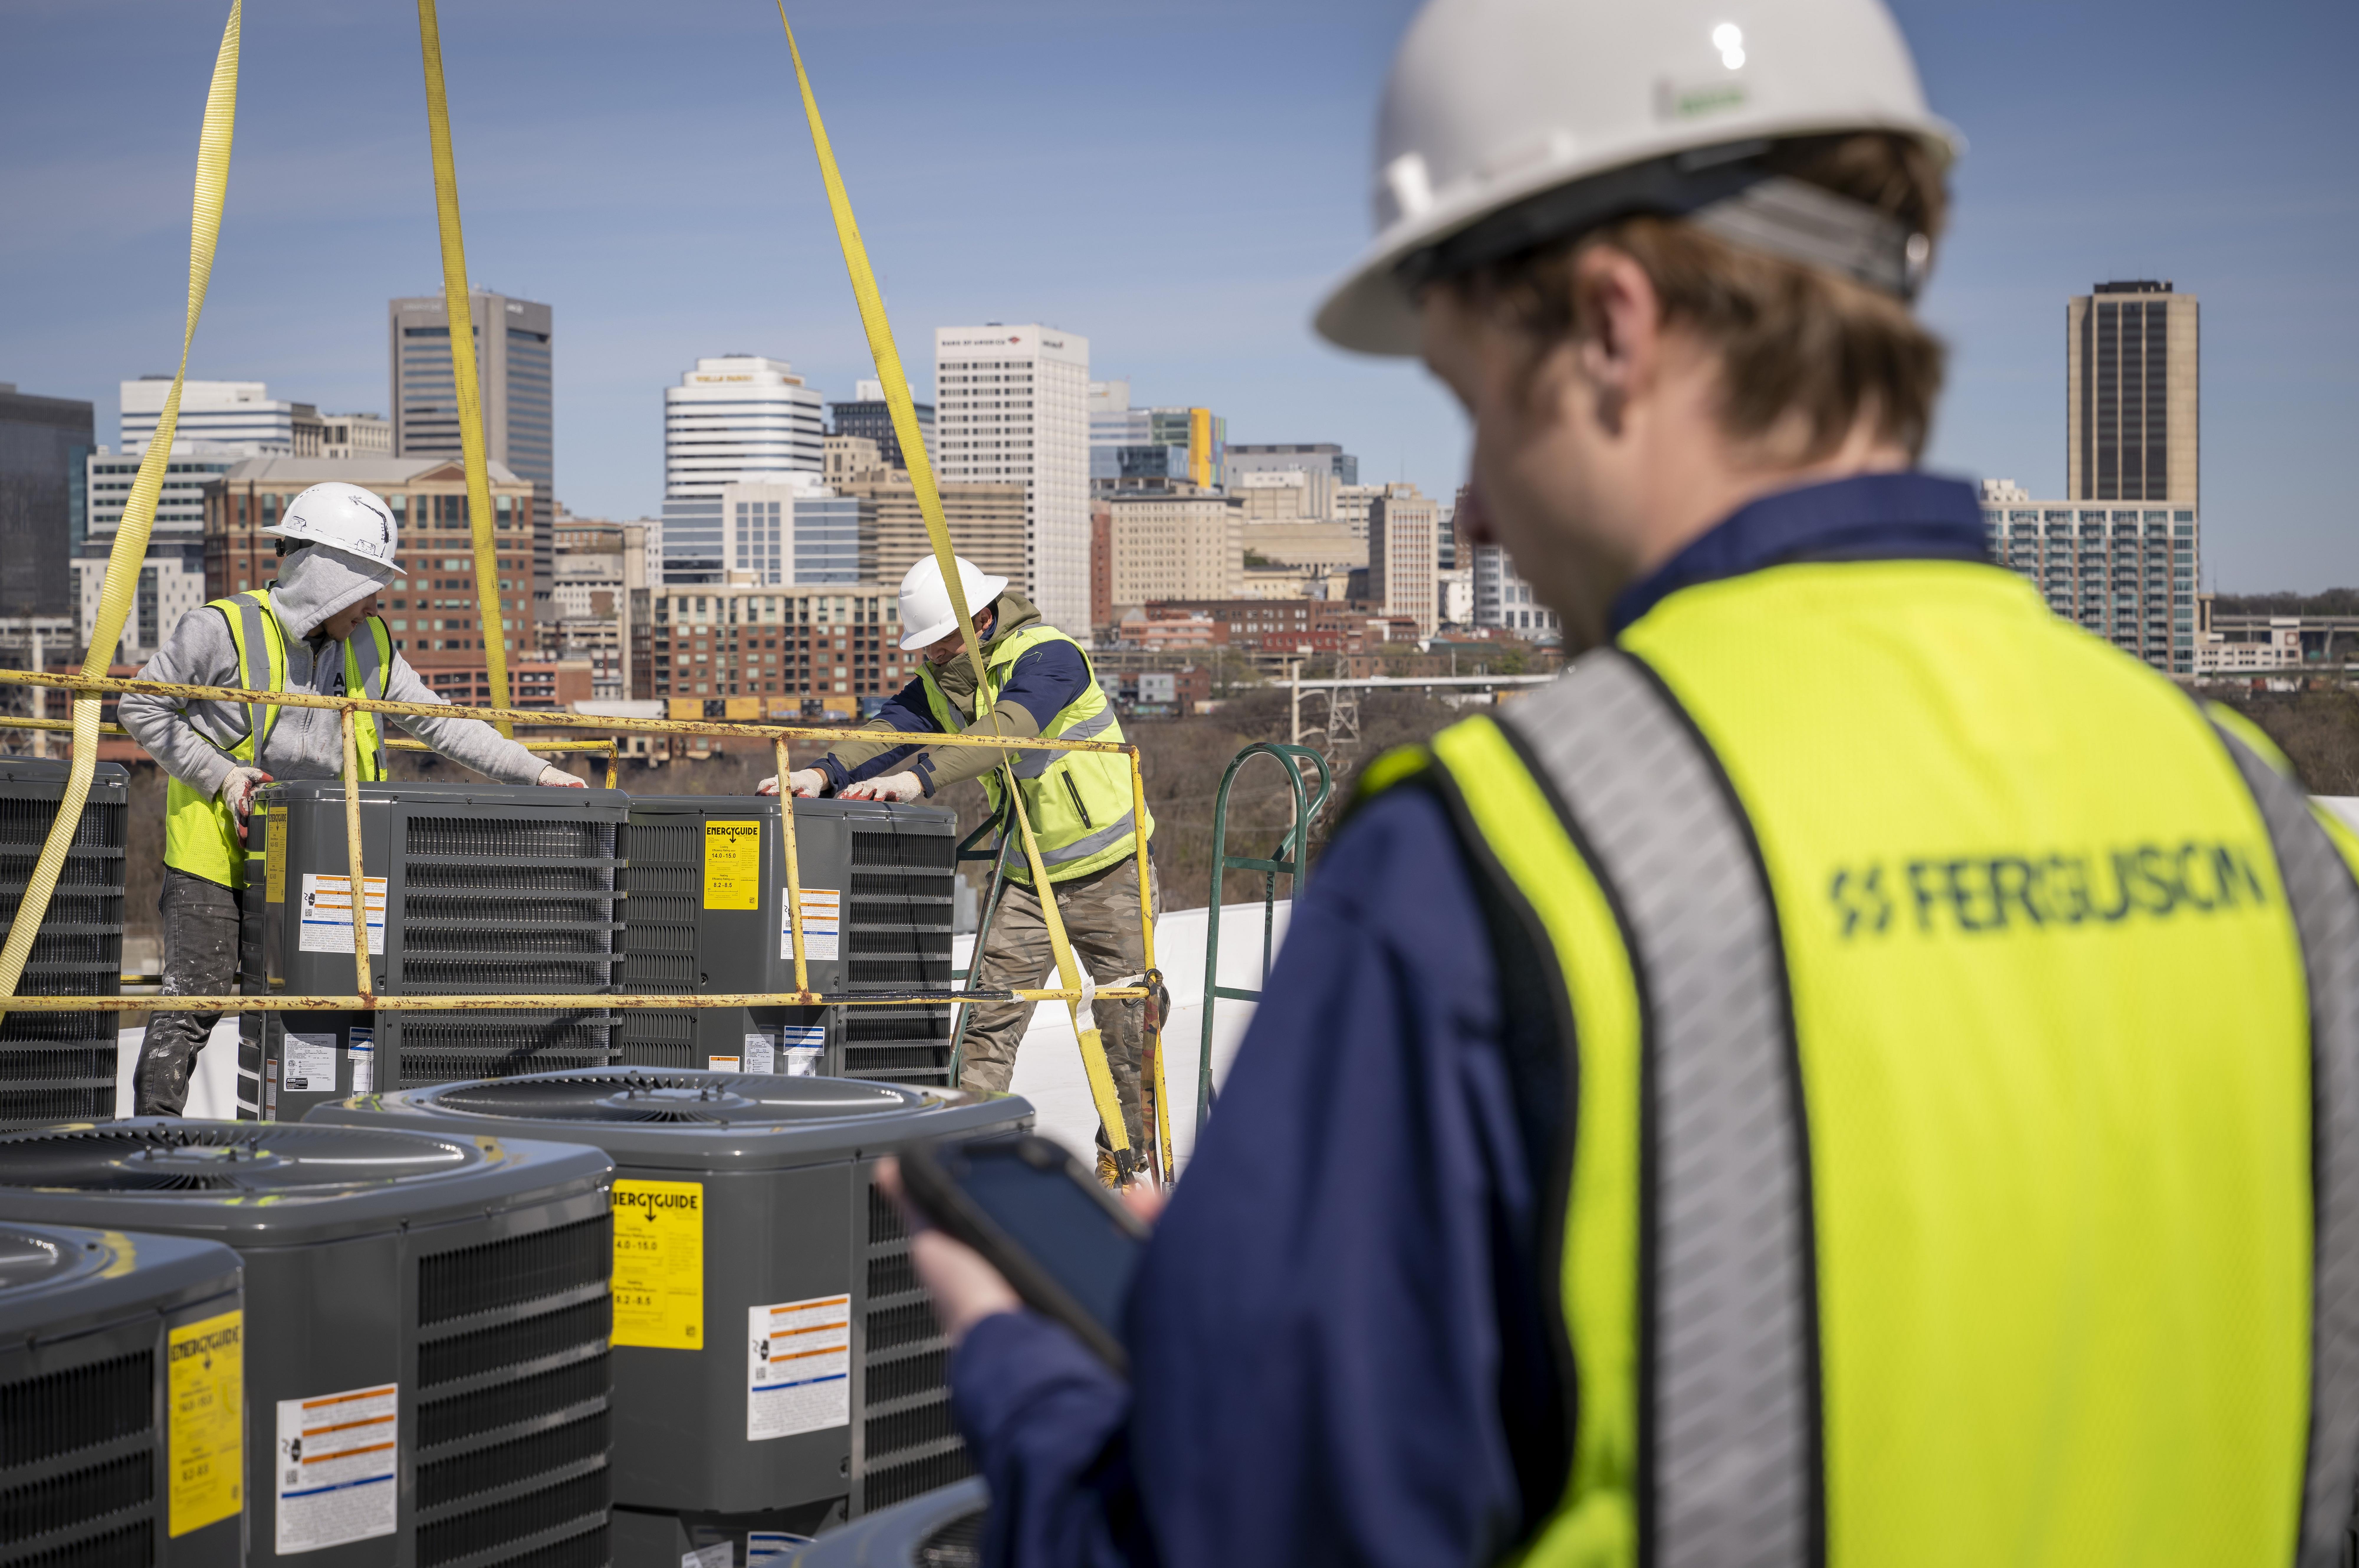 Ferguson associates install air conditioners on a rooftop.